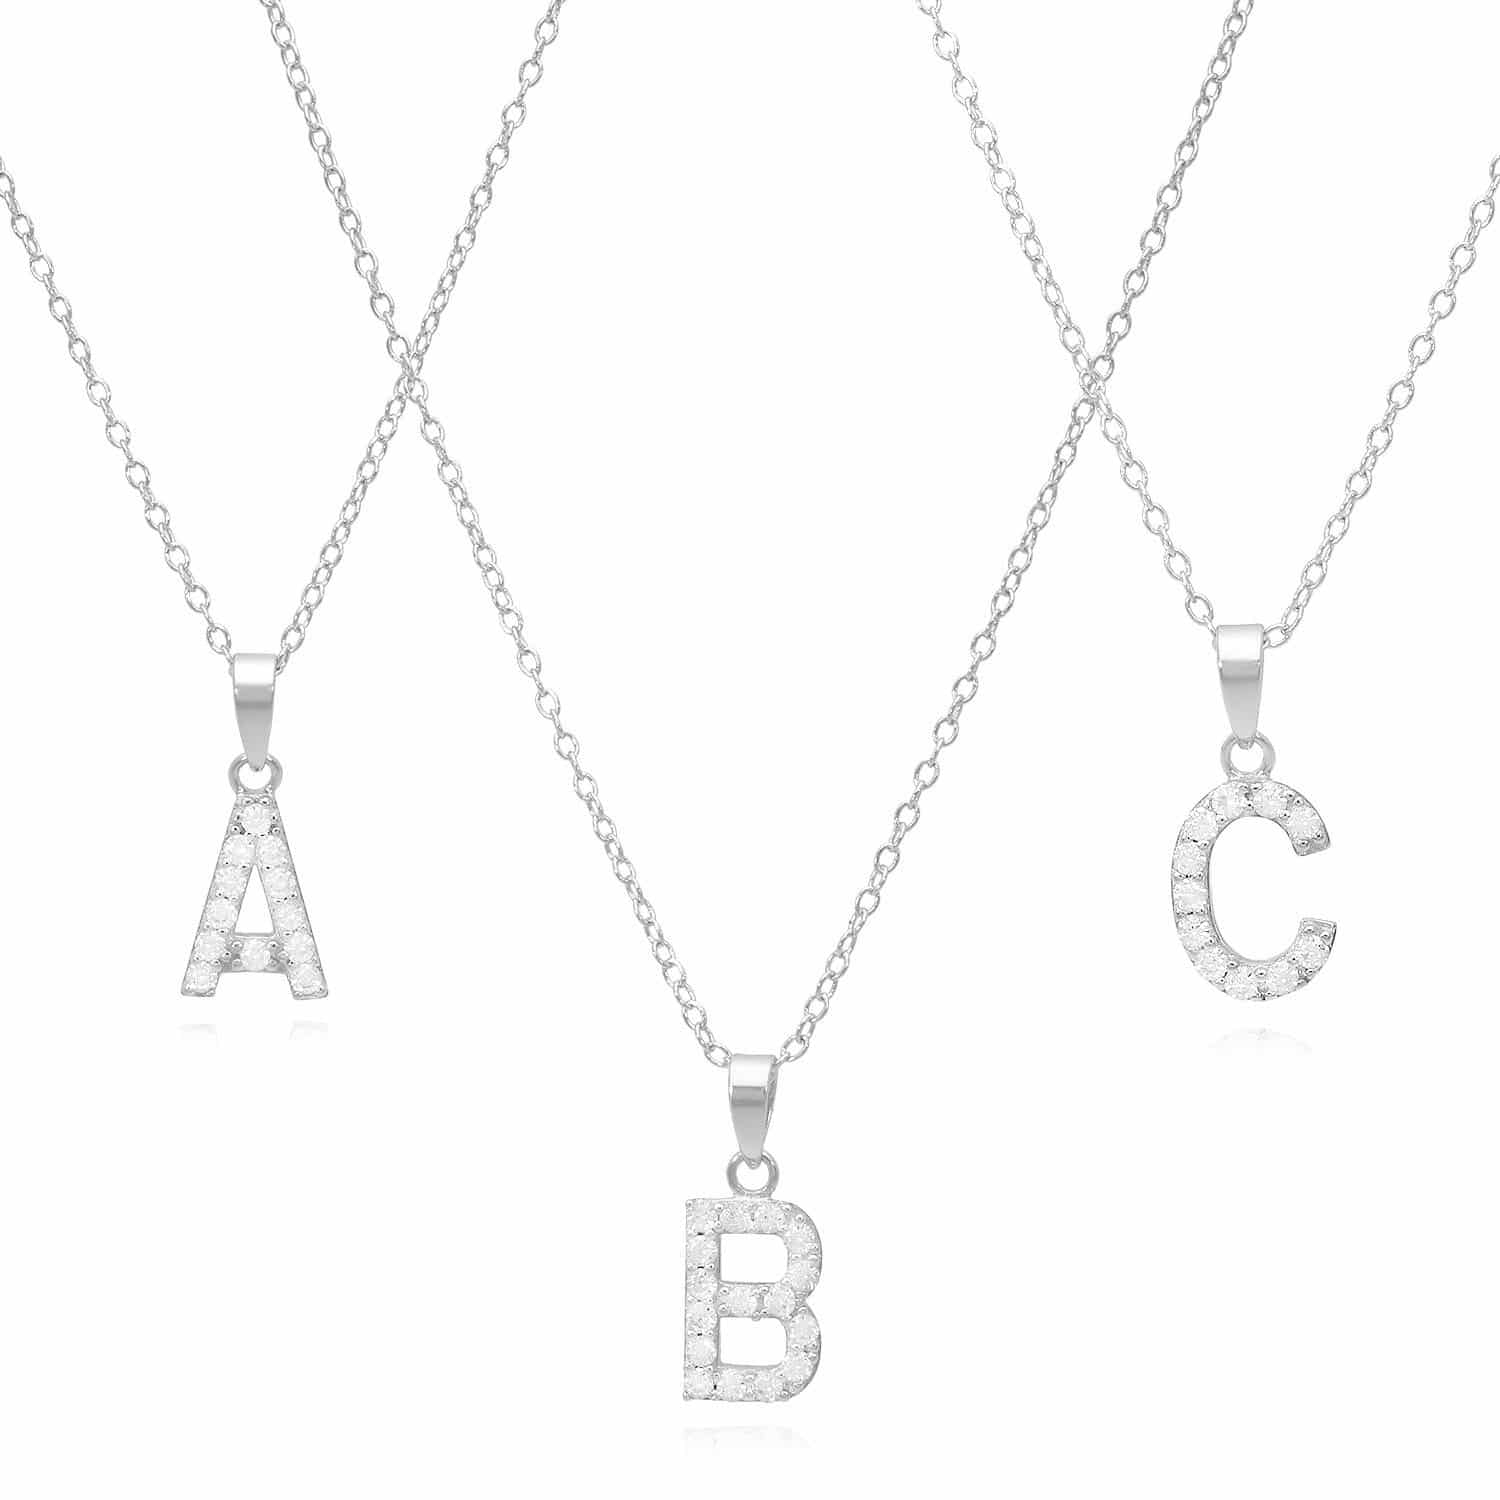 Sterling Silver Simulated Diamond Initial Pendant Chain Necklace 18" - E